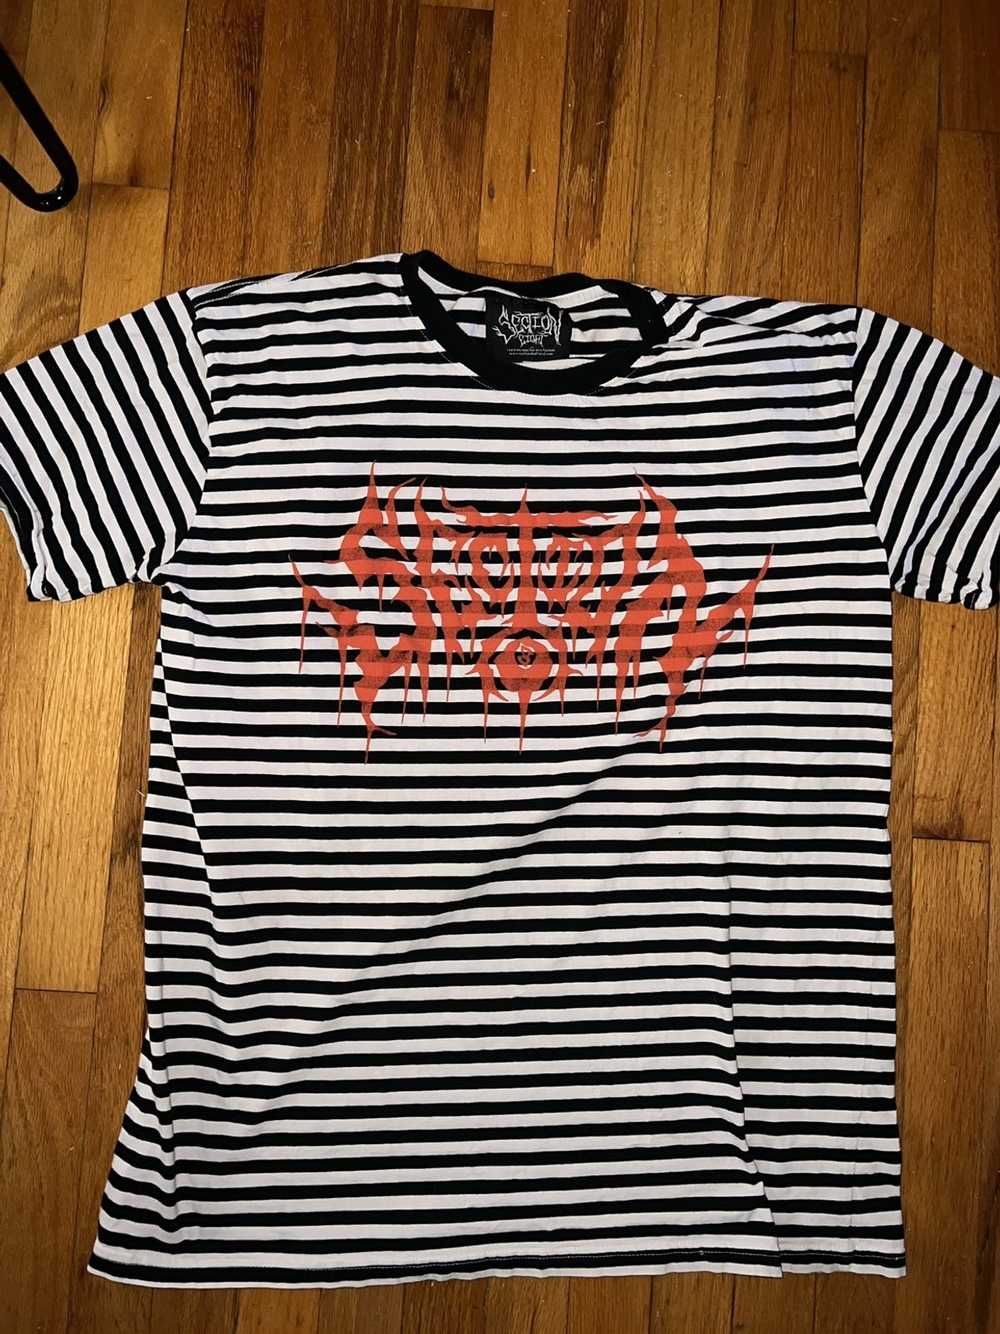 Section 8 SECTION 8 SKULL STRIPED TSHIRT - image 1